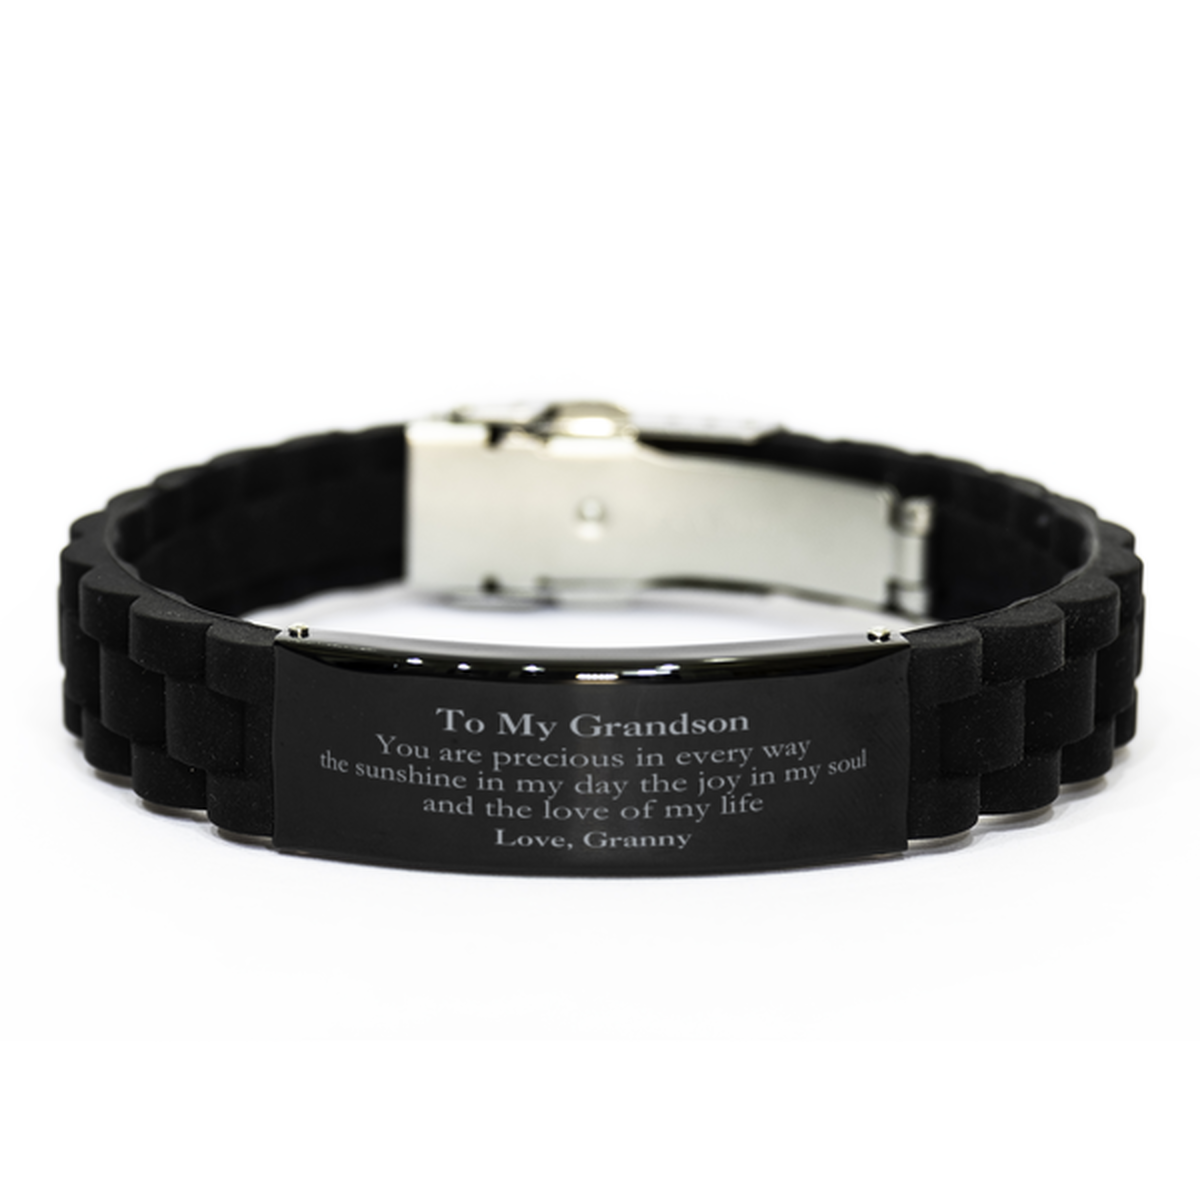 Graduation Gifts for Grandson Black Glidelock Clasp Bracelet Present from Granny, Christmas Grandson Birthday Gifts Grandson You are precious in every way the sunshine in my day. Love, Granny